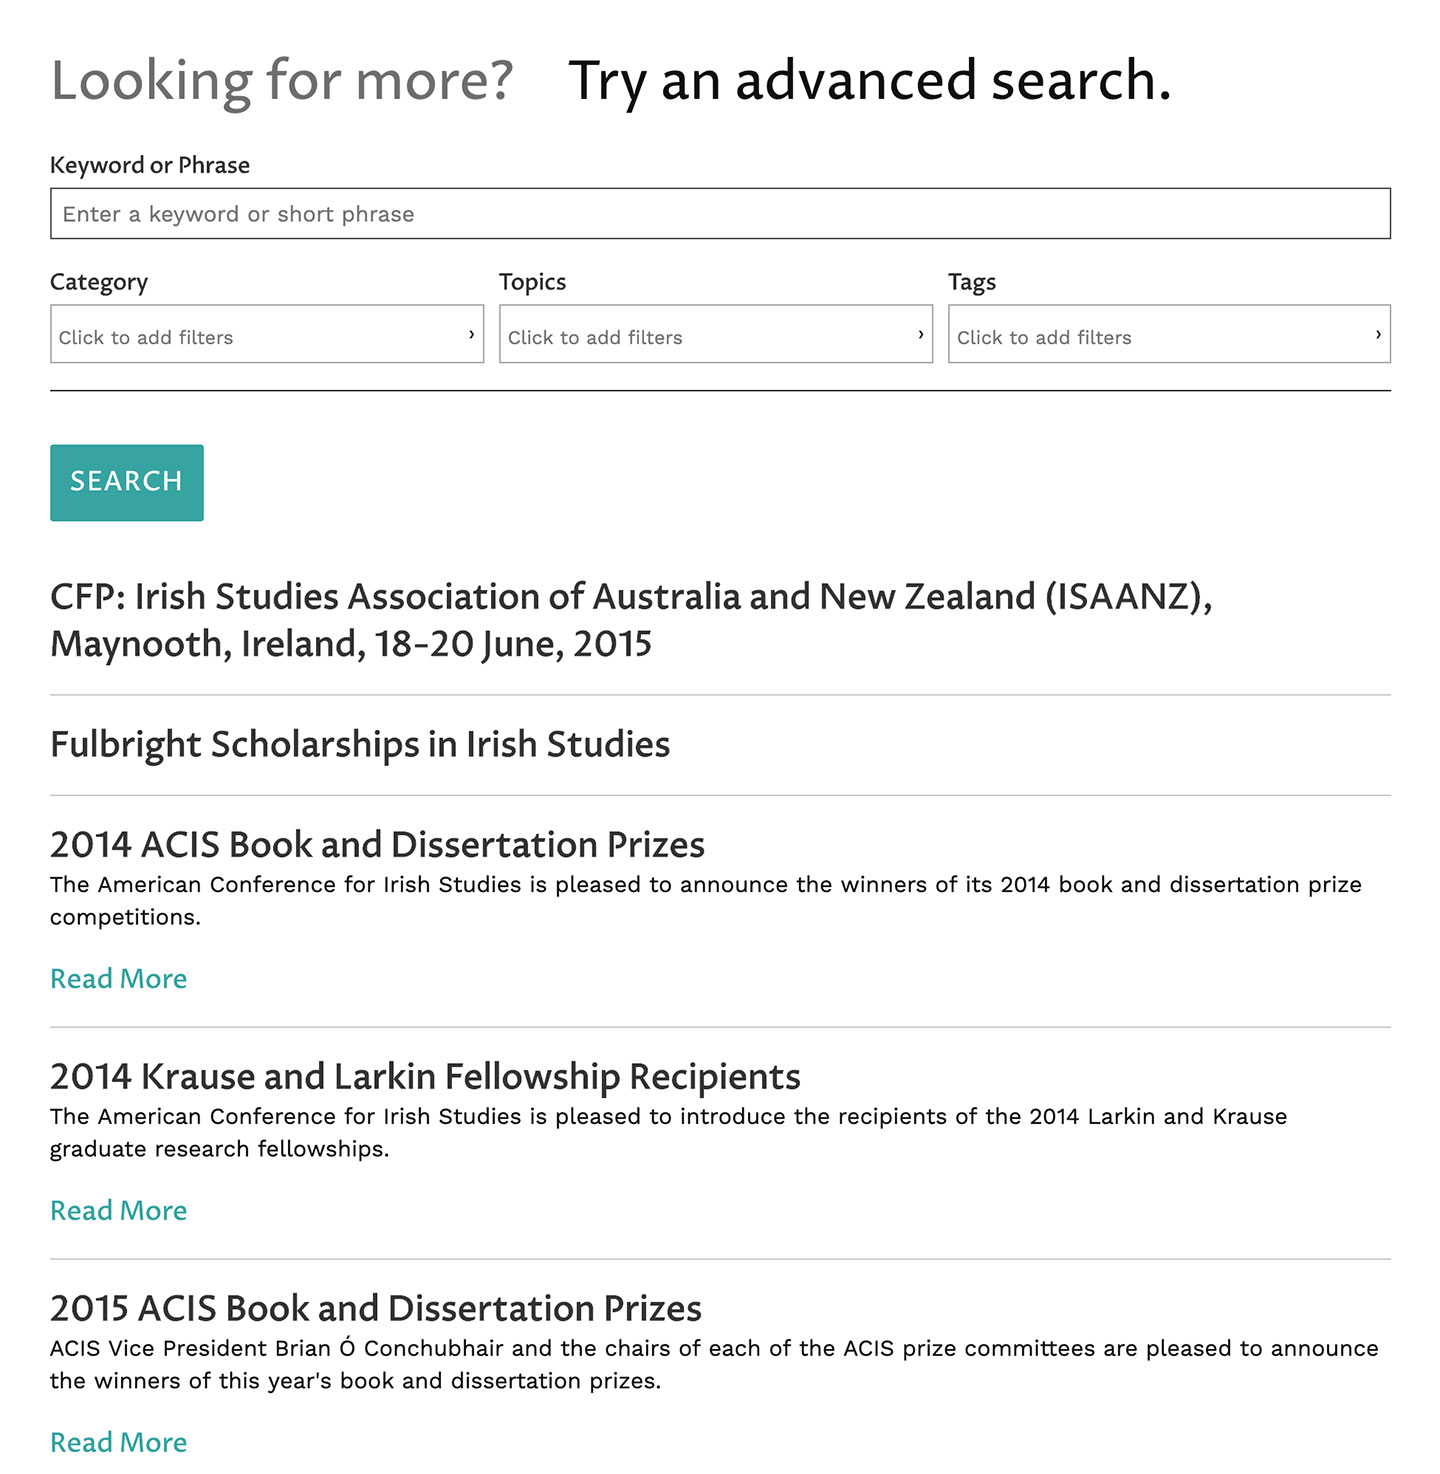 American Conference for Irish Studies (ACIS): ACIS: Advanced Conference Search